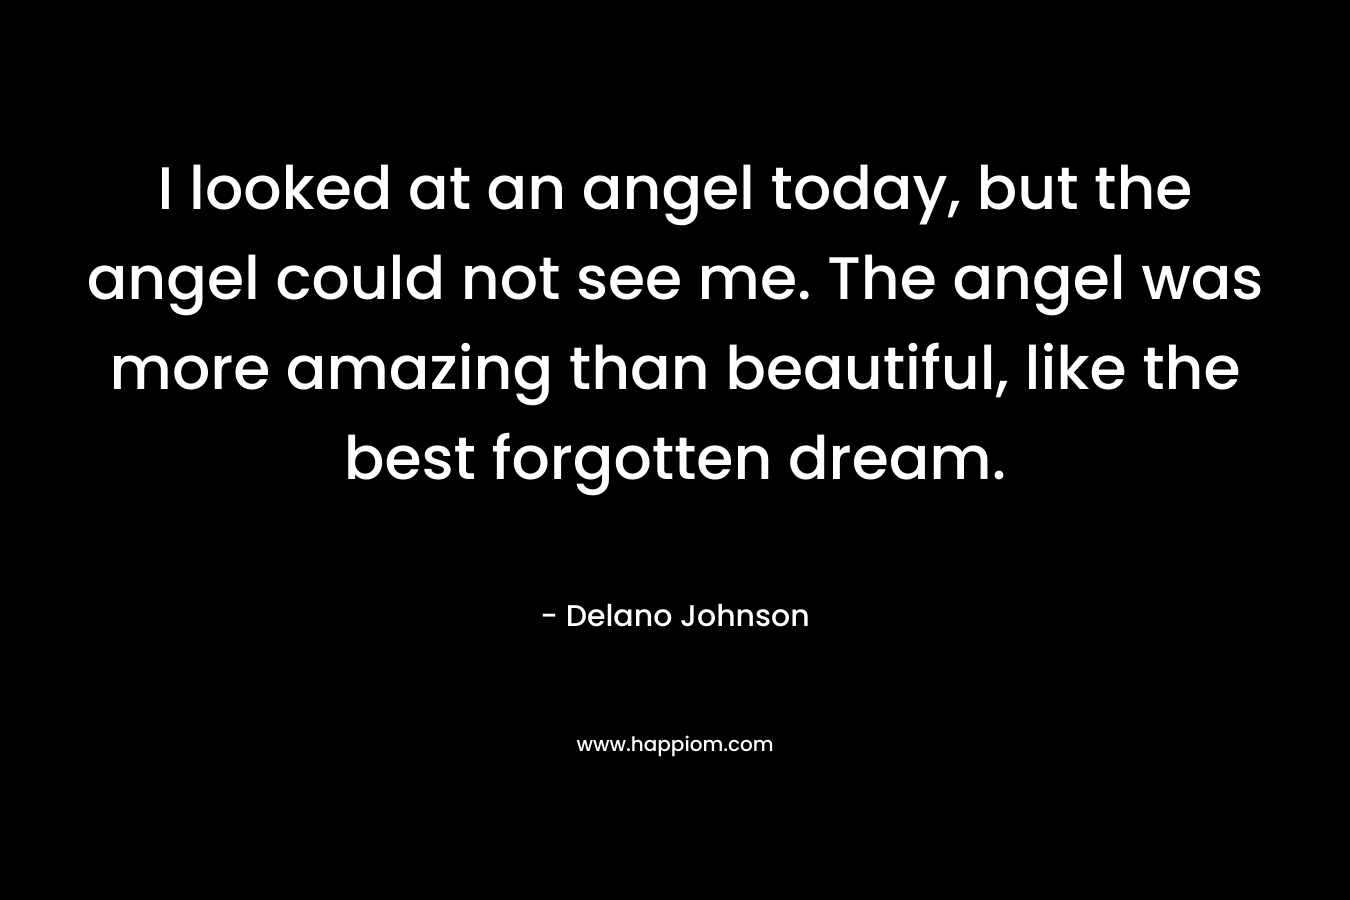 I looked at an angel today, but the angel could not see me. The angel was more amazing than beautiful, like the best forgotten dream.